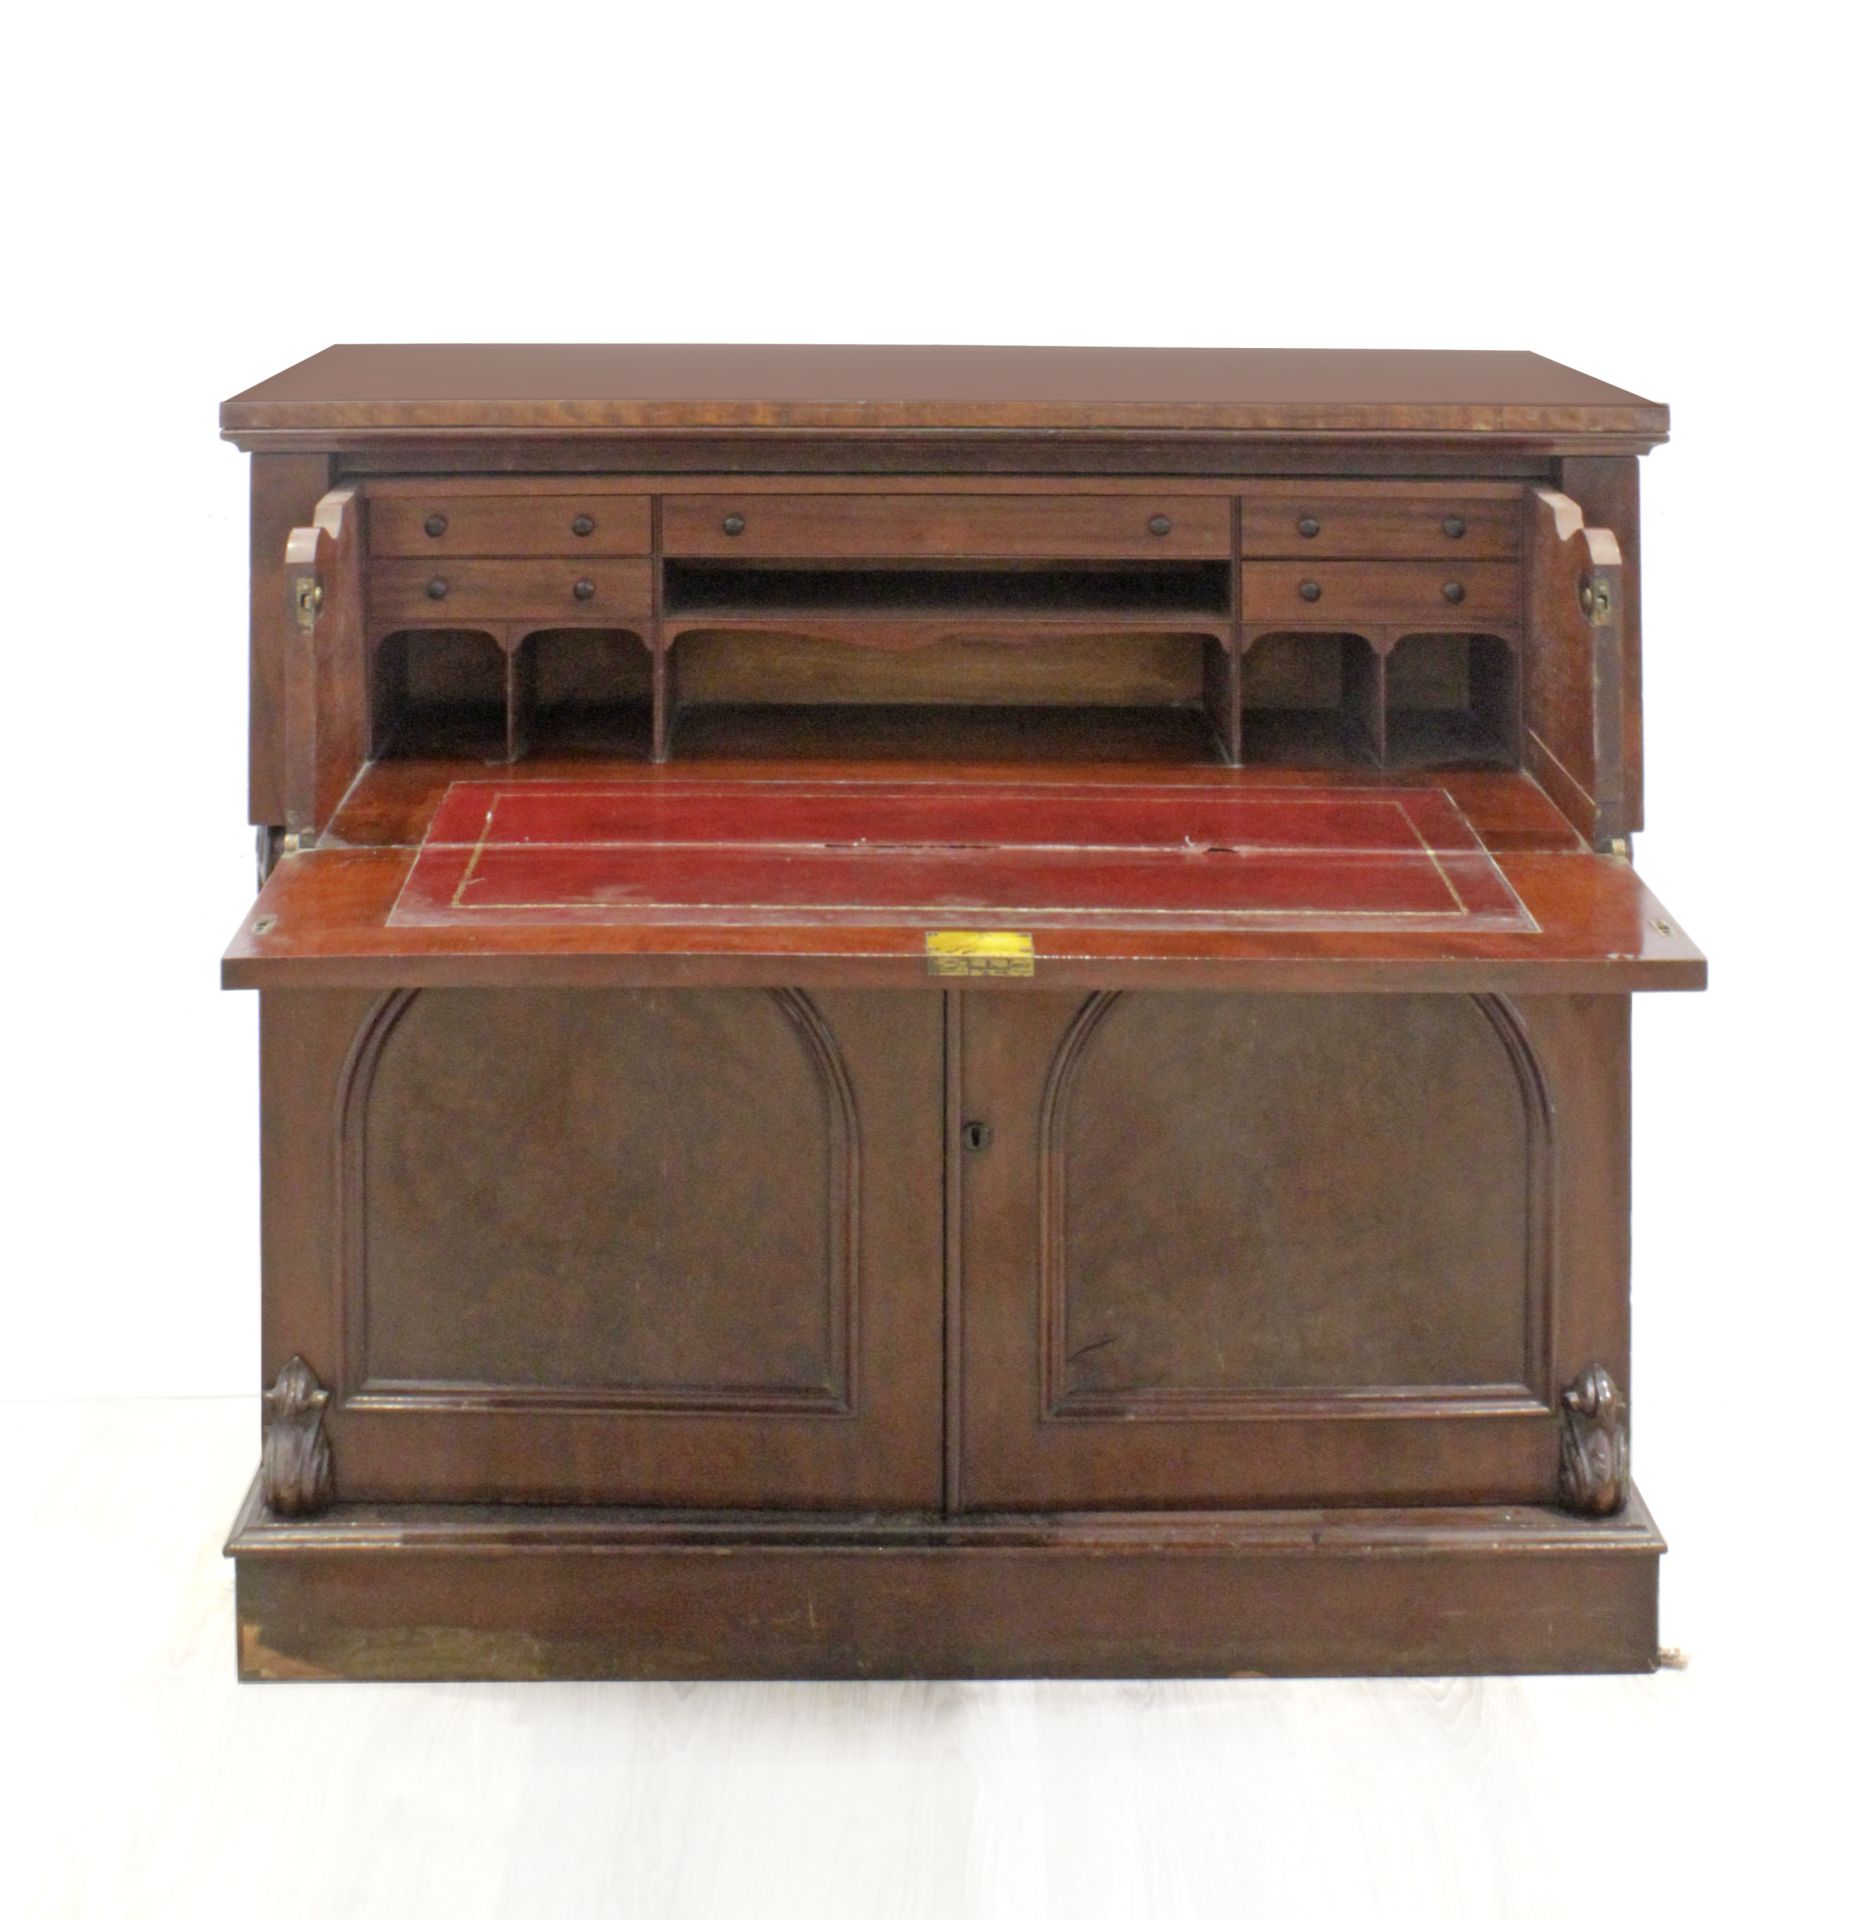 A 19th century Victorian period mahogany writing desk - Image 2 of 5